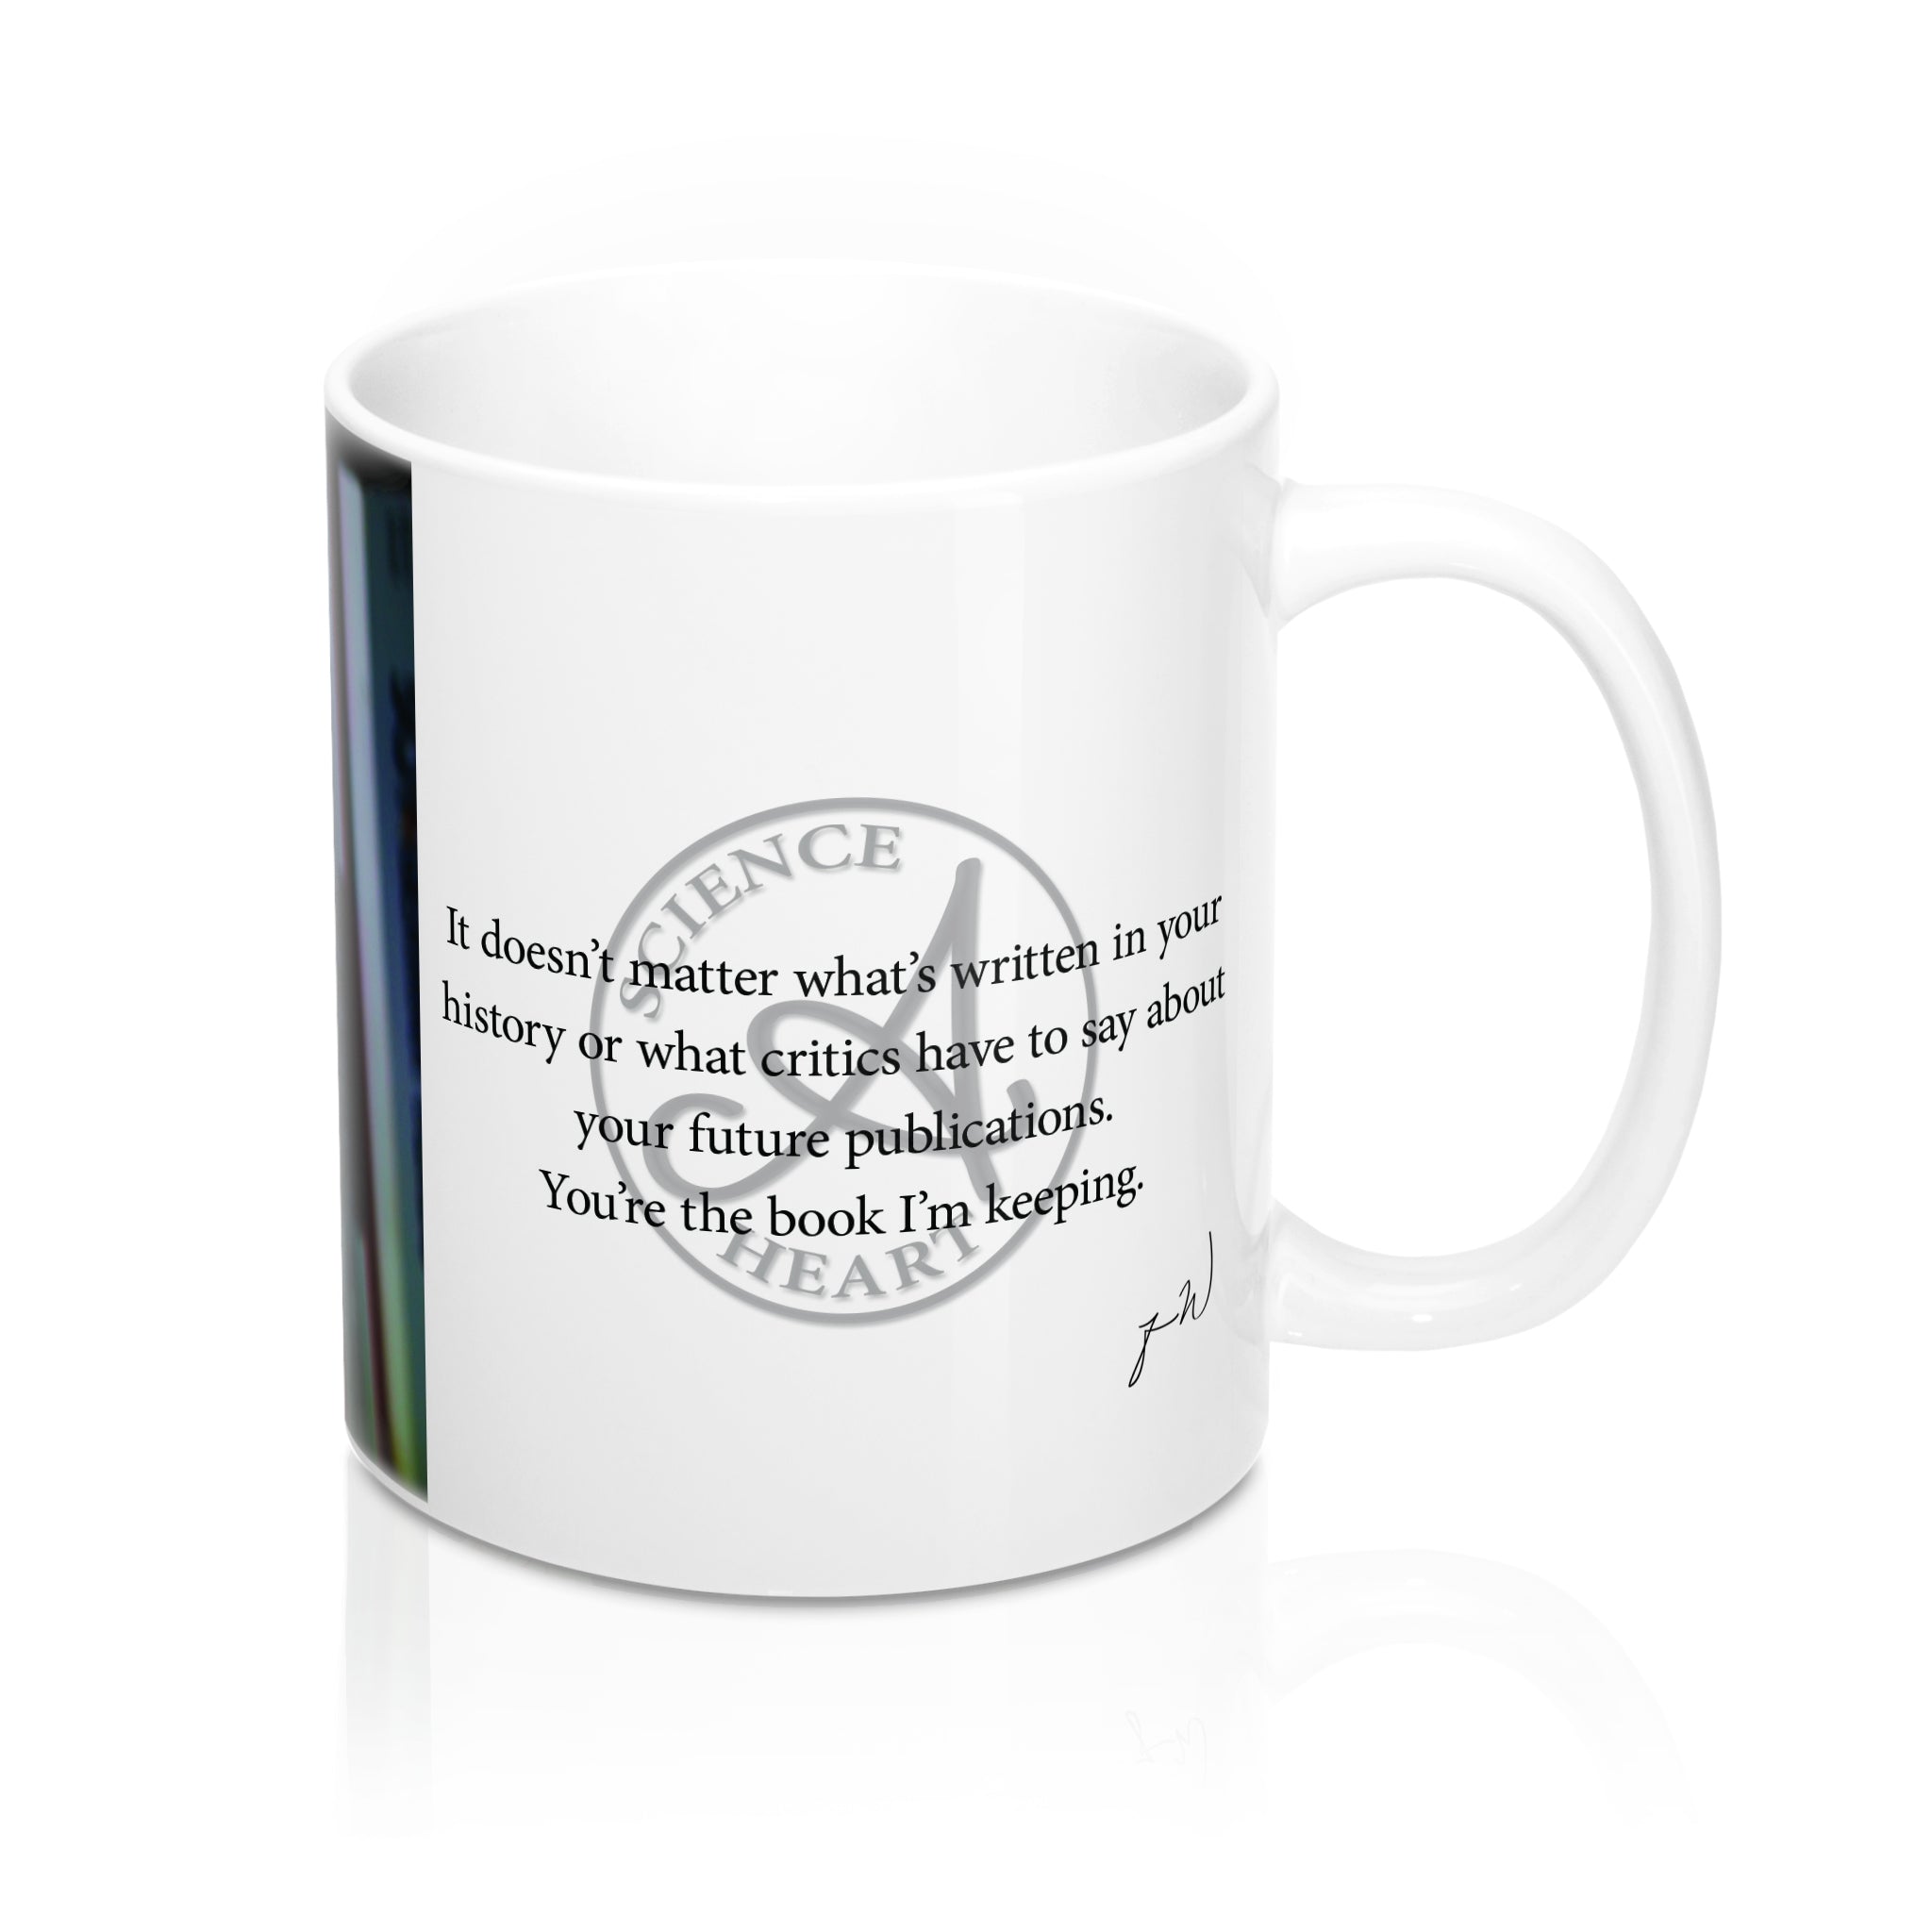 "It doesn’t matter what’s written in your history" Mug